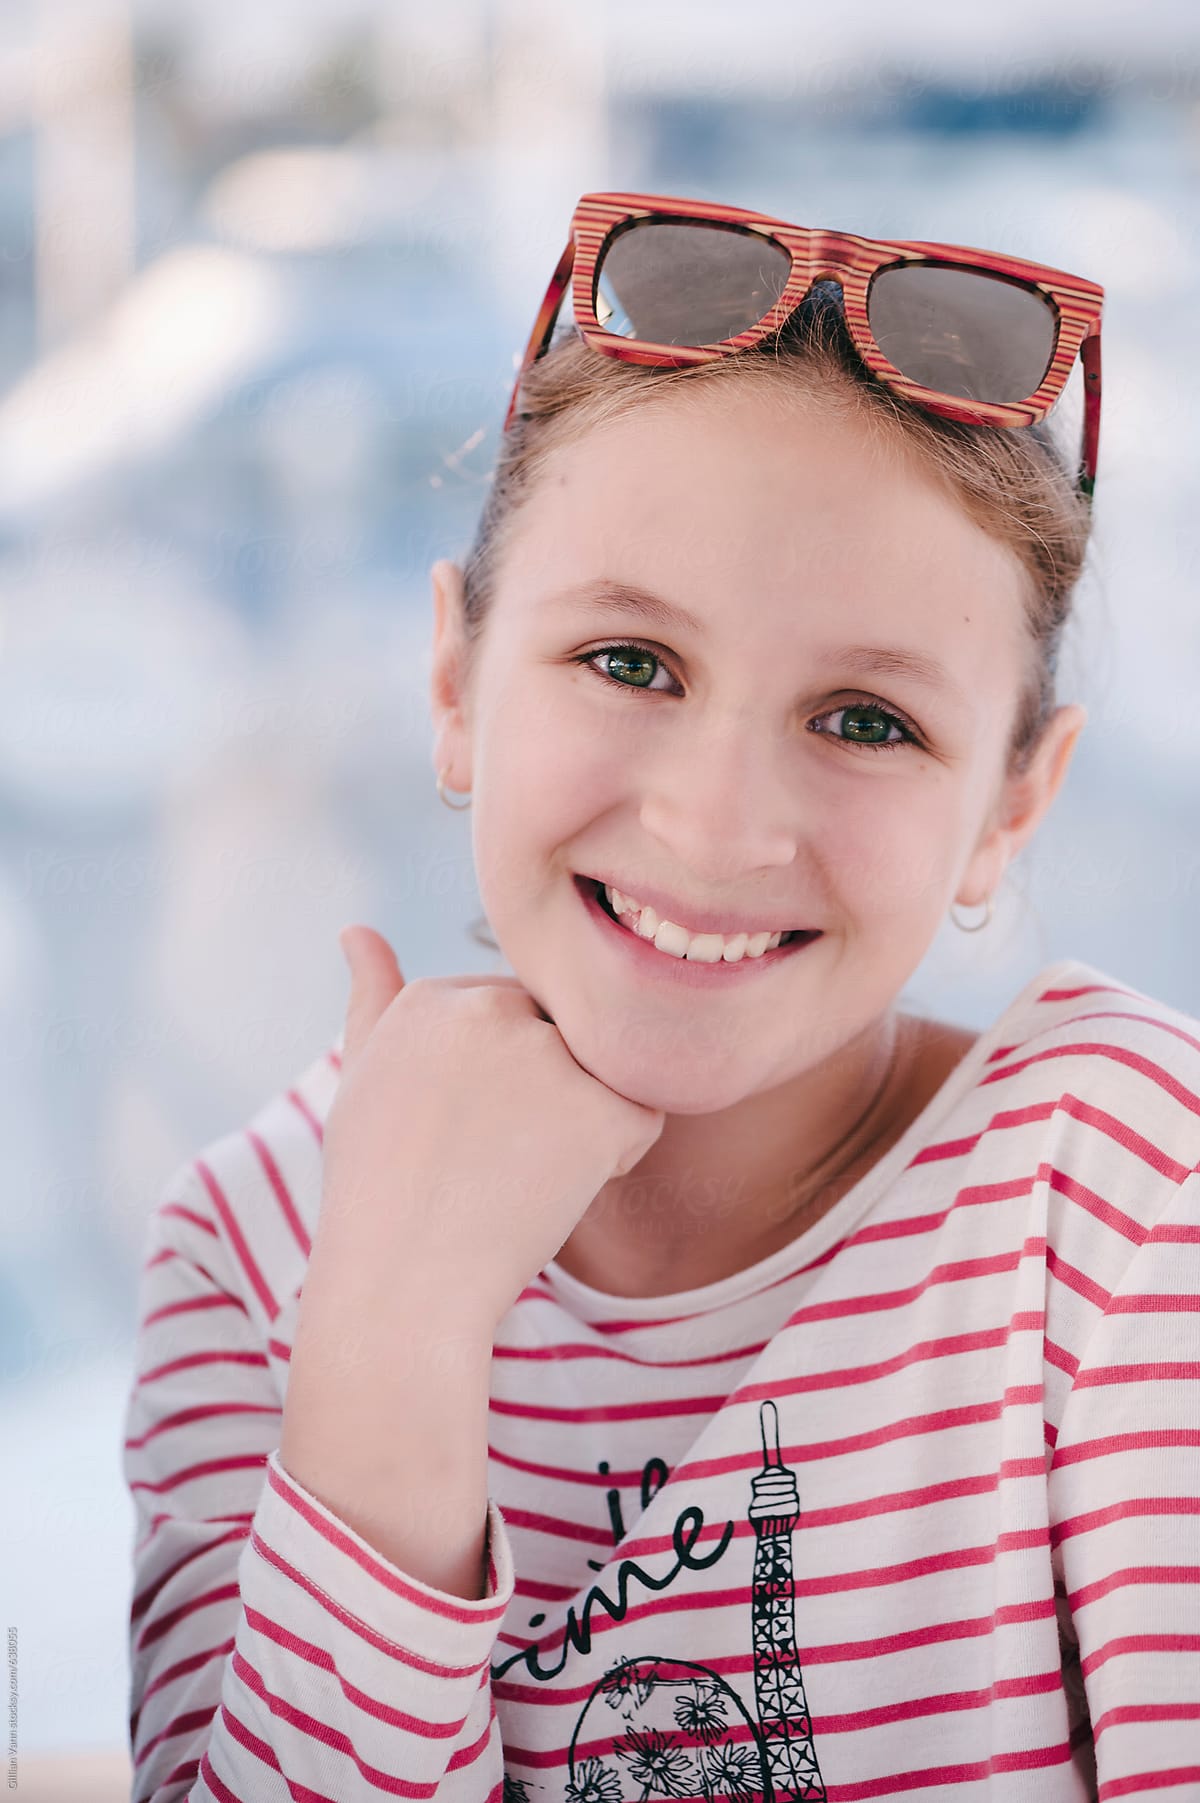 Portrait Of Tween Girl With Sunglasses And A Stripy Top By Stocksy